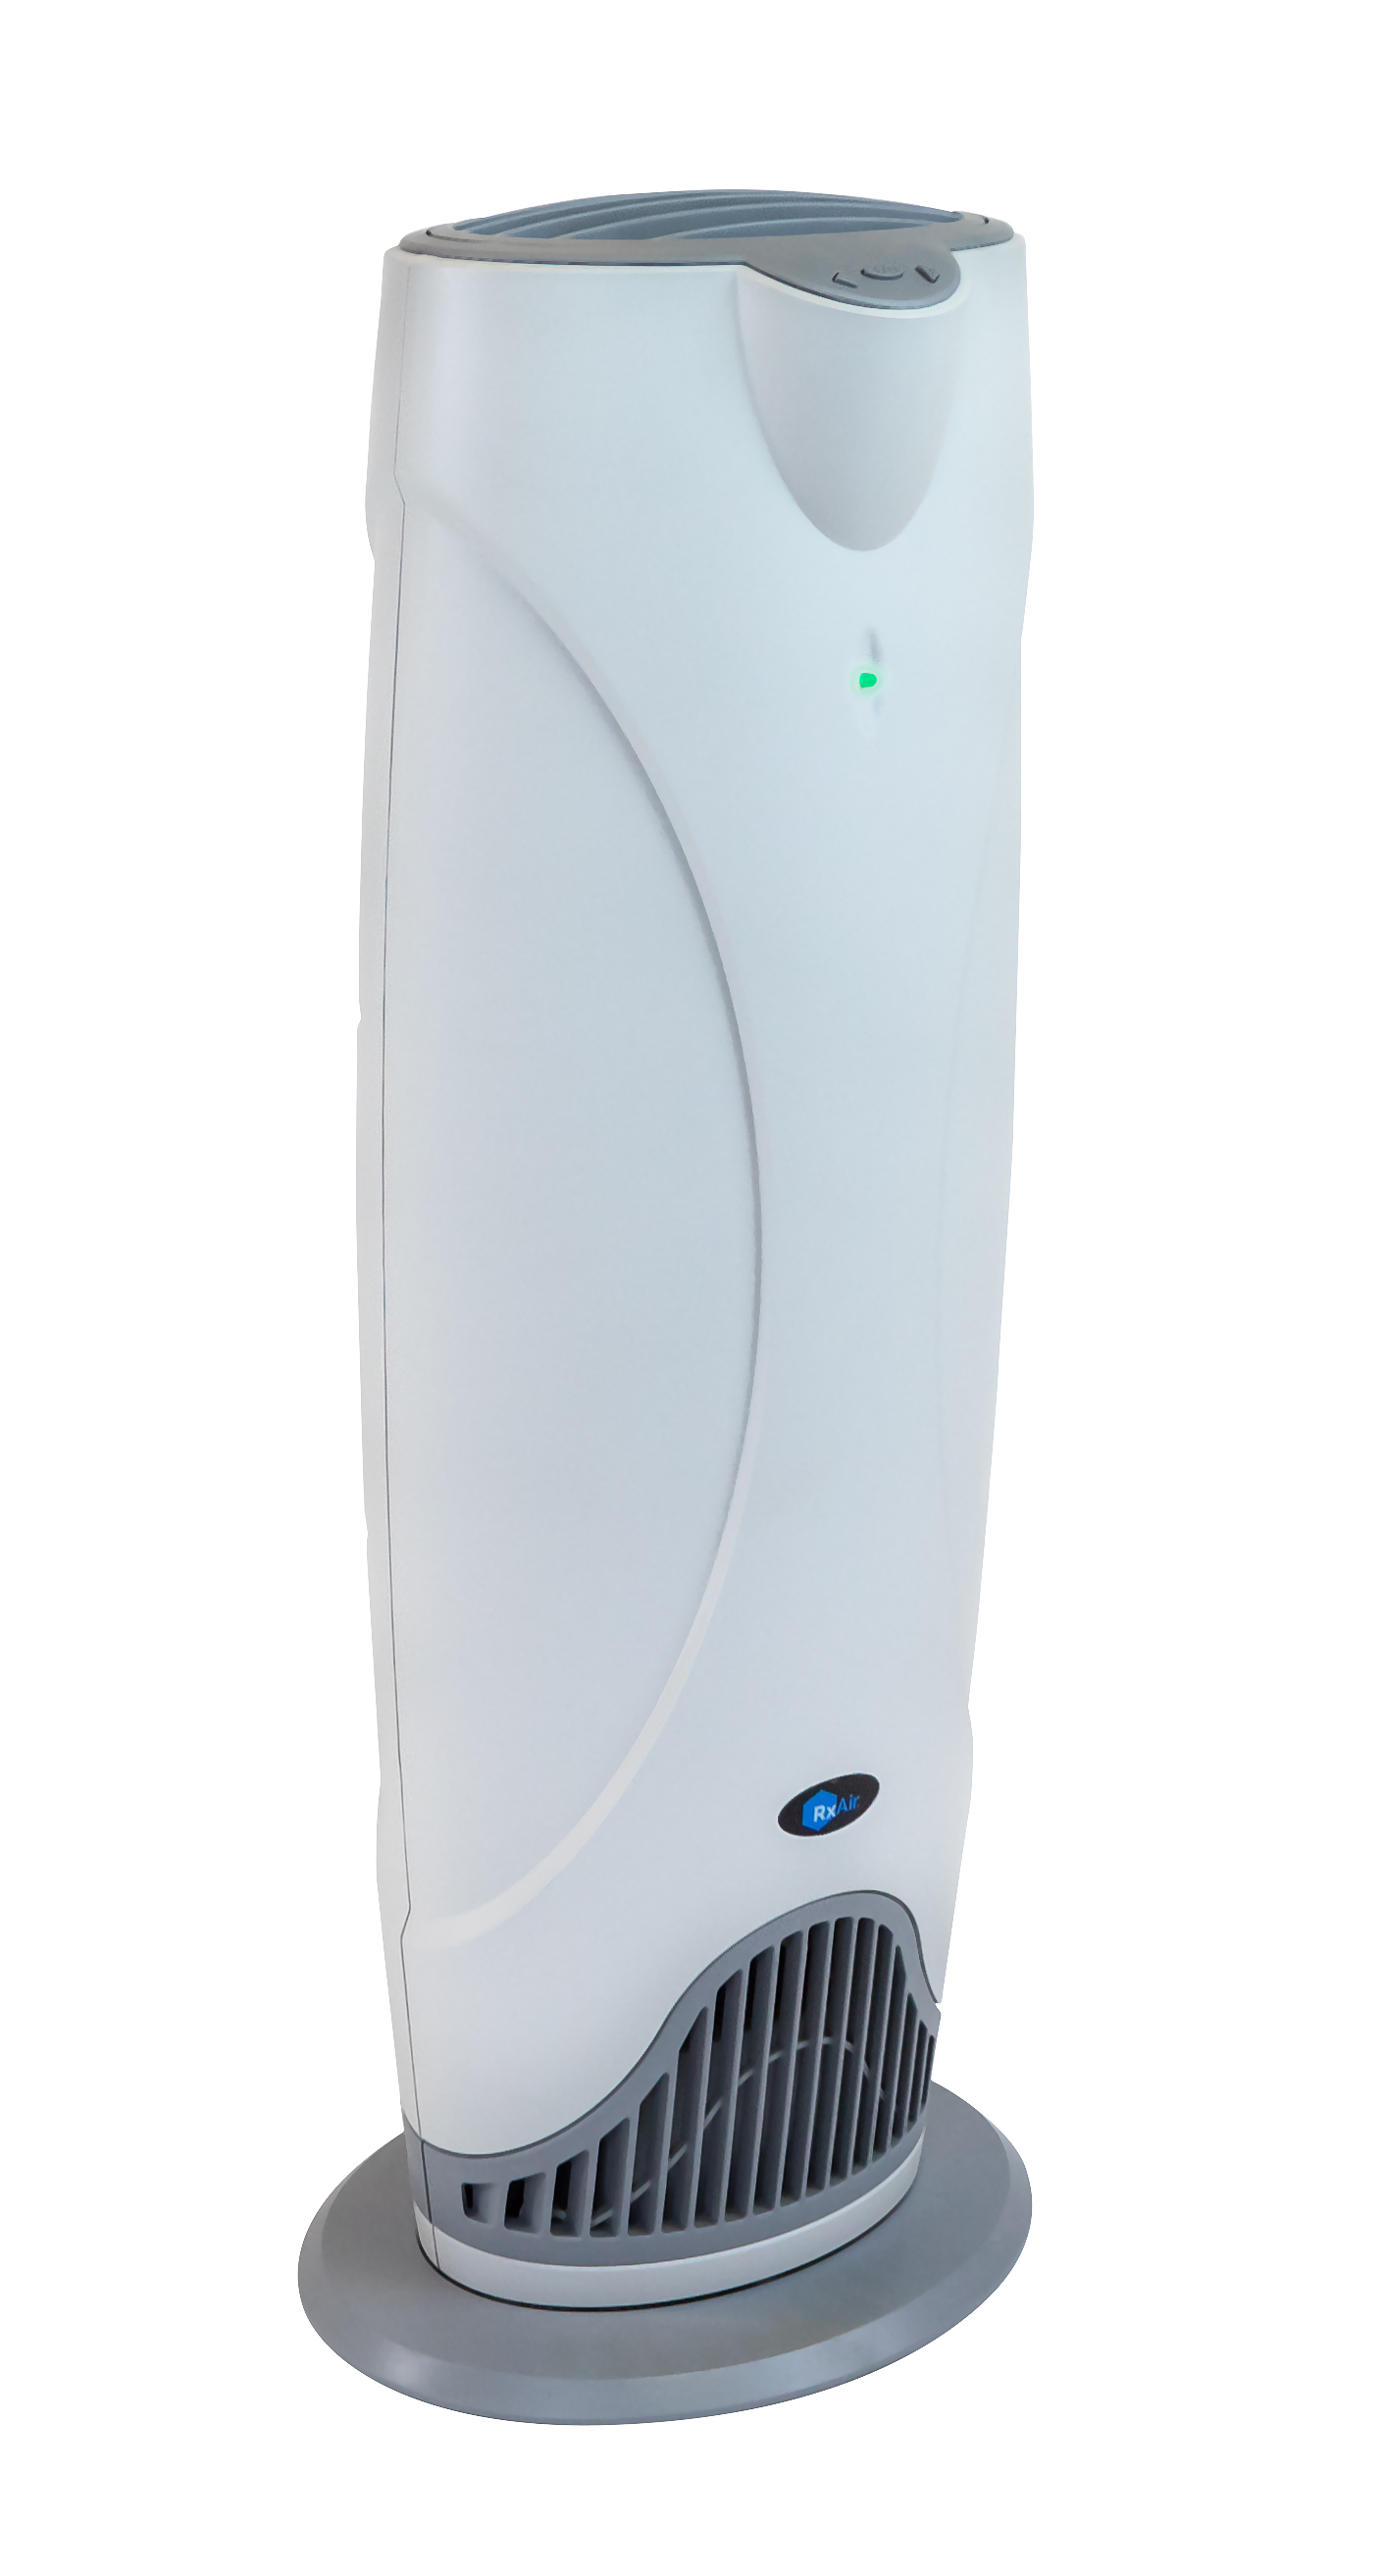 RxAir 400 UV-C light air purifiers destroy more than 99.9% of airborne viruses and bacteria, and are ideal for schools, restaurants, homes, small businesses and more.